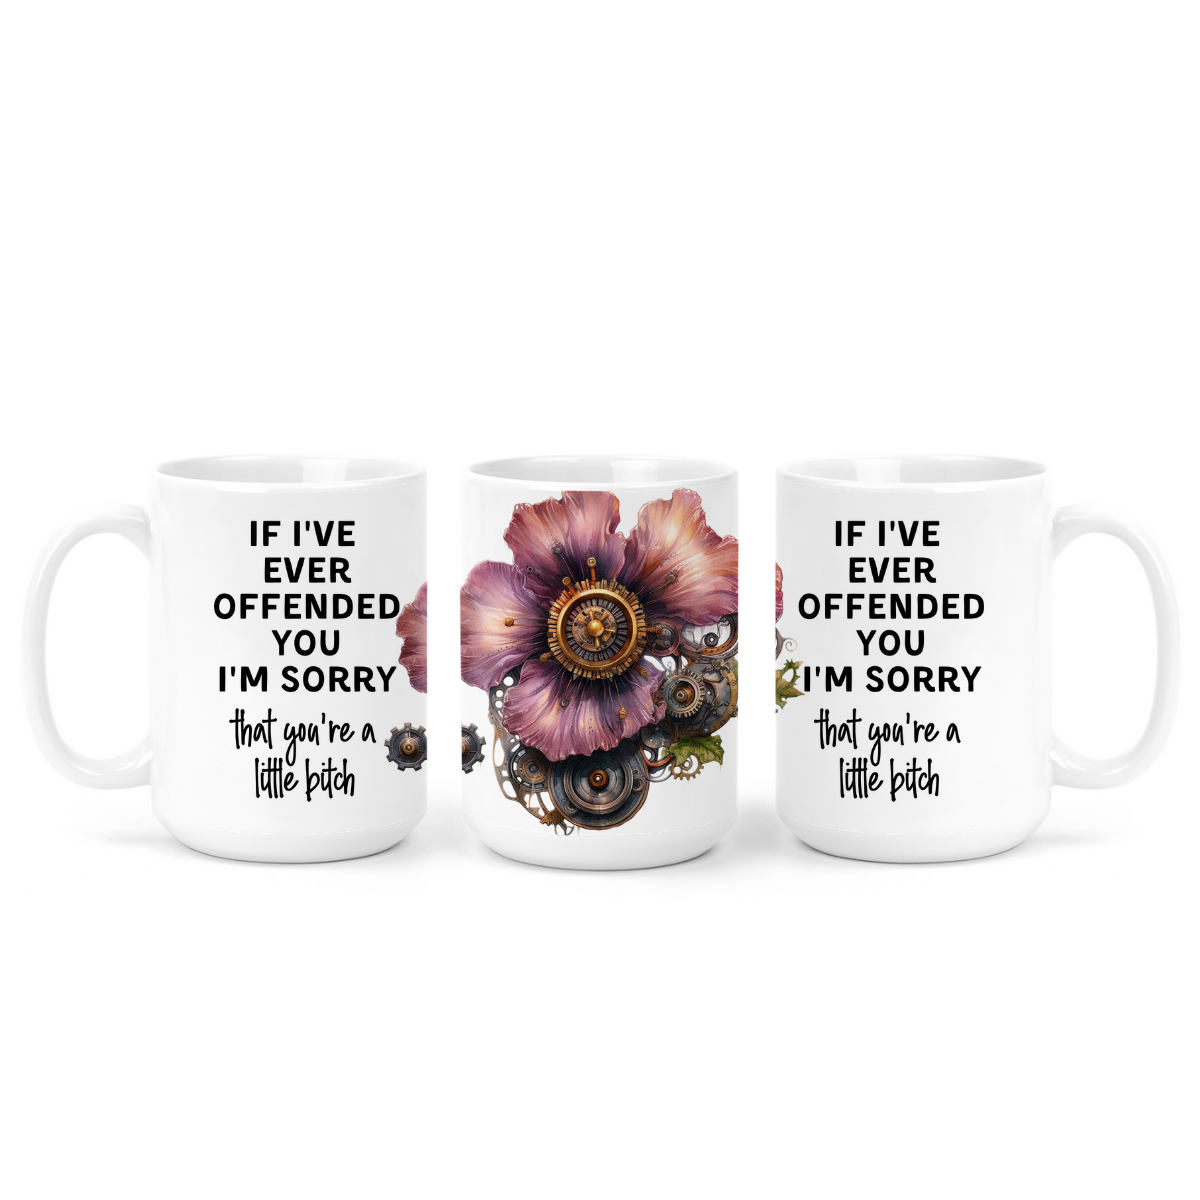 If I've Ever Offended You I'm Sorry | Mug - The Pretty Things.ca